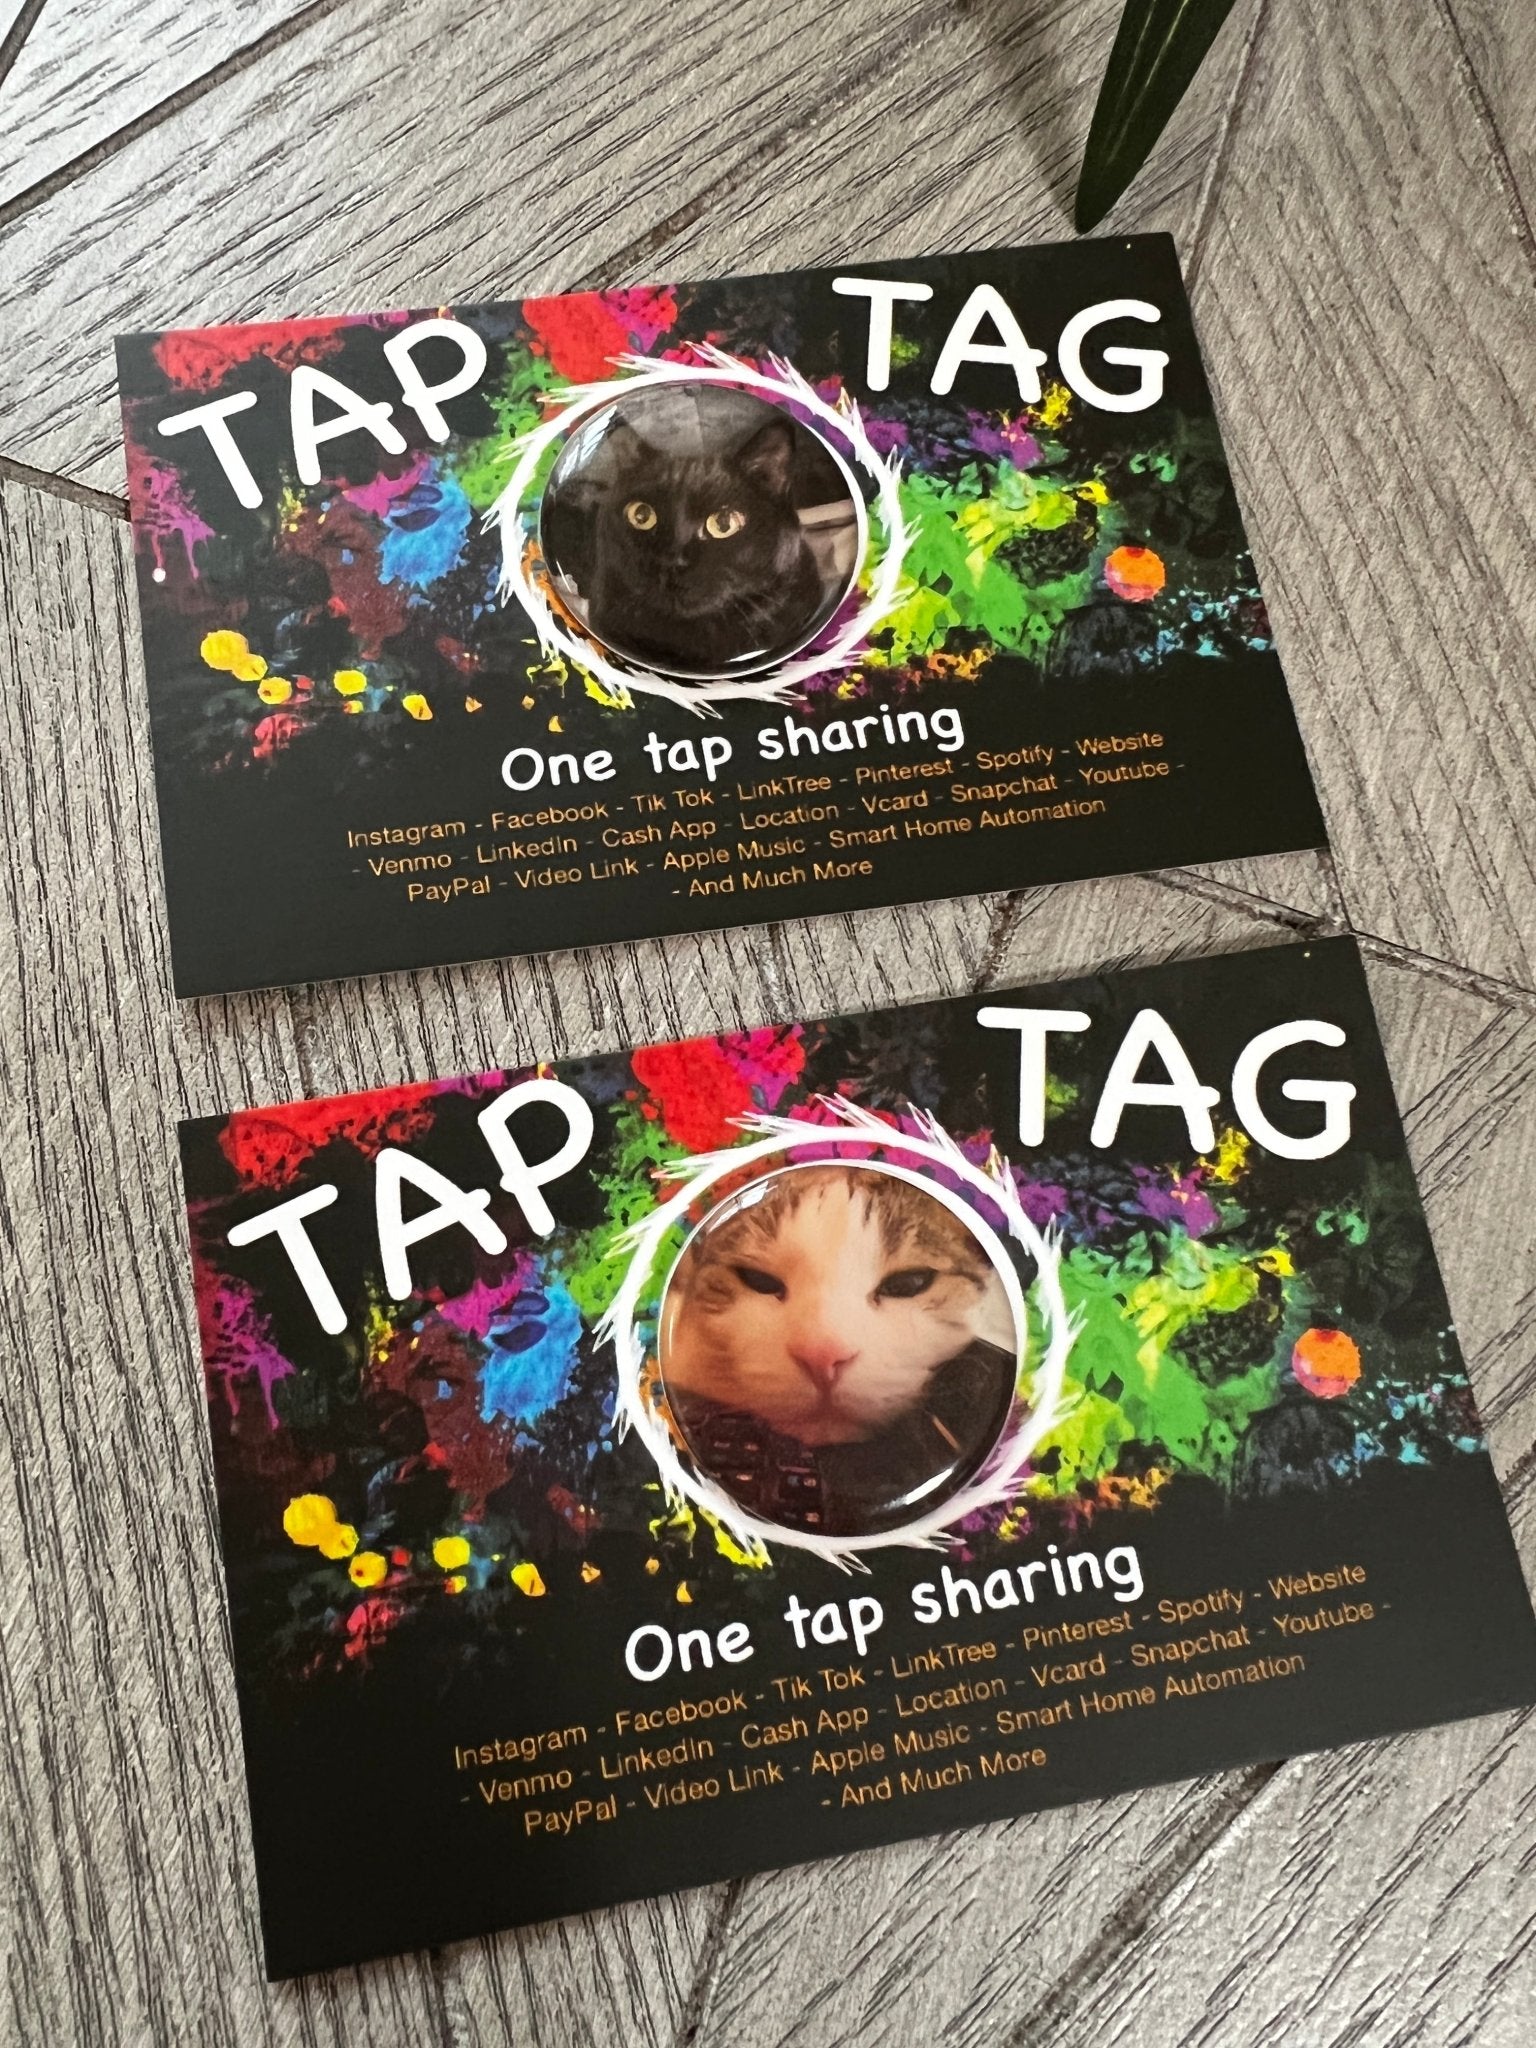 Tap Tag - UPLOAD YOUR DESIGN - Tap Tag